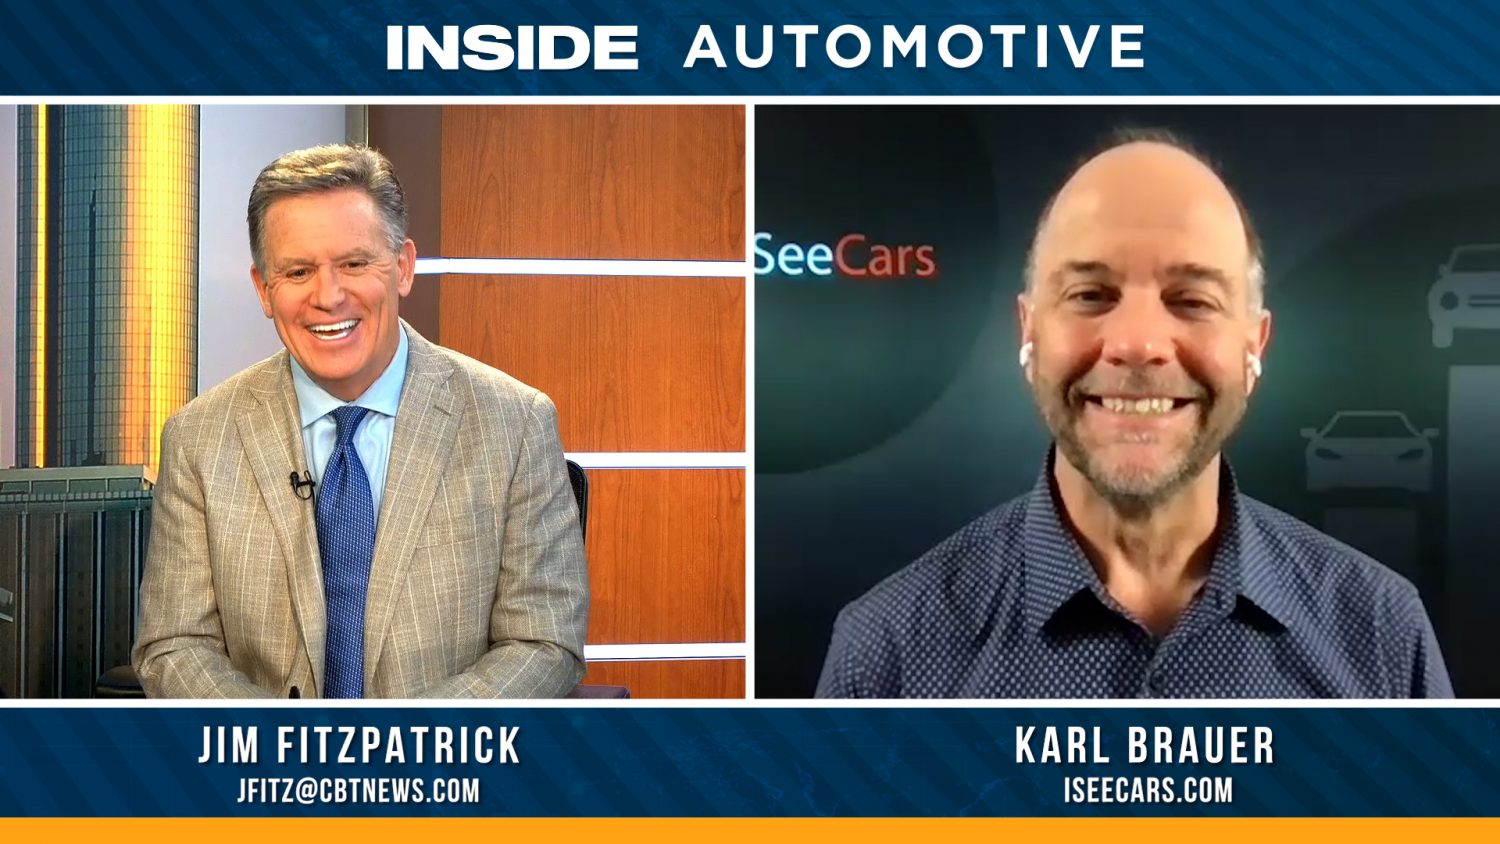 Joining us on today's episode of Inside Automotive is Karl Brauer, Executive Analyst for iSeecars, highlights EVs depreciating value